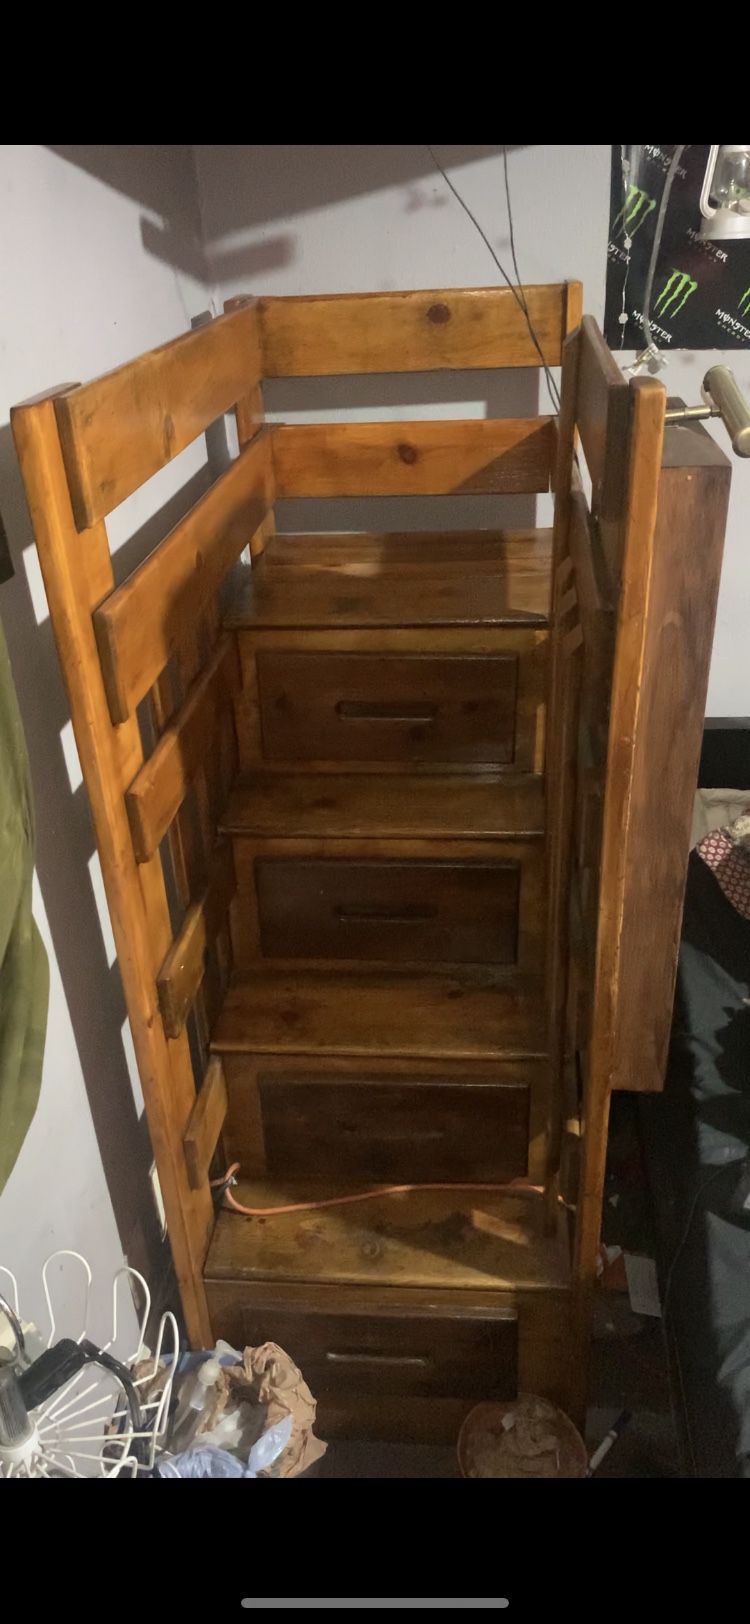 Vintage Wooden Bunk Bed Stairs